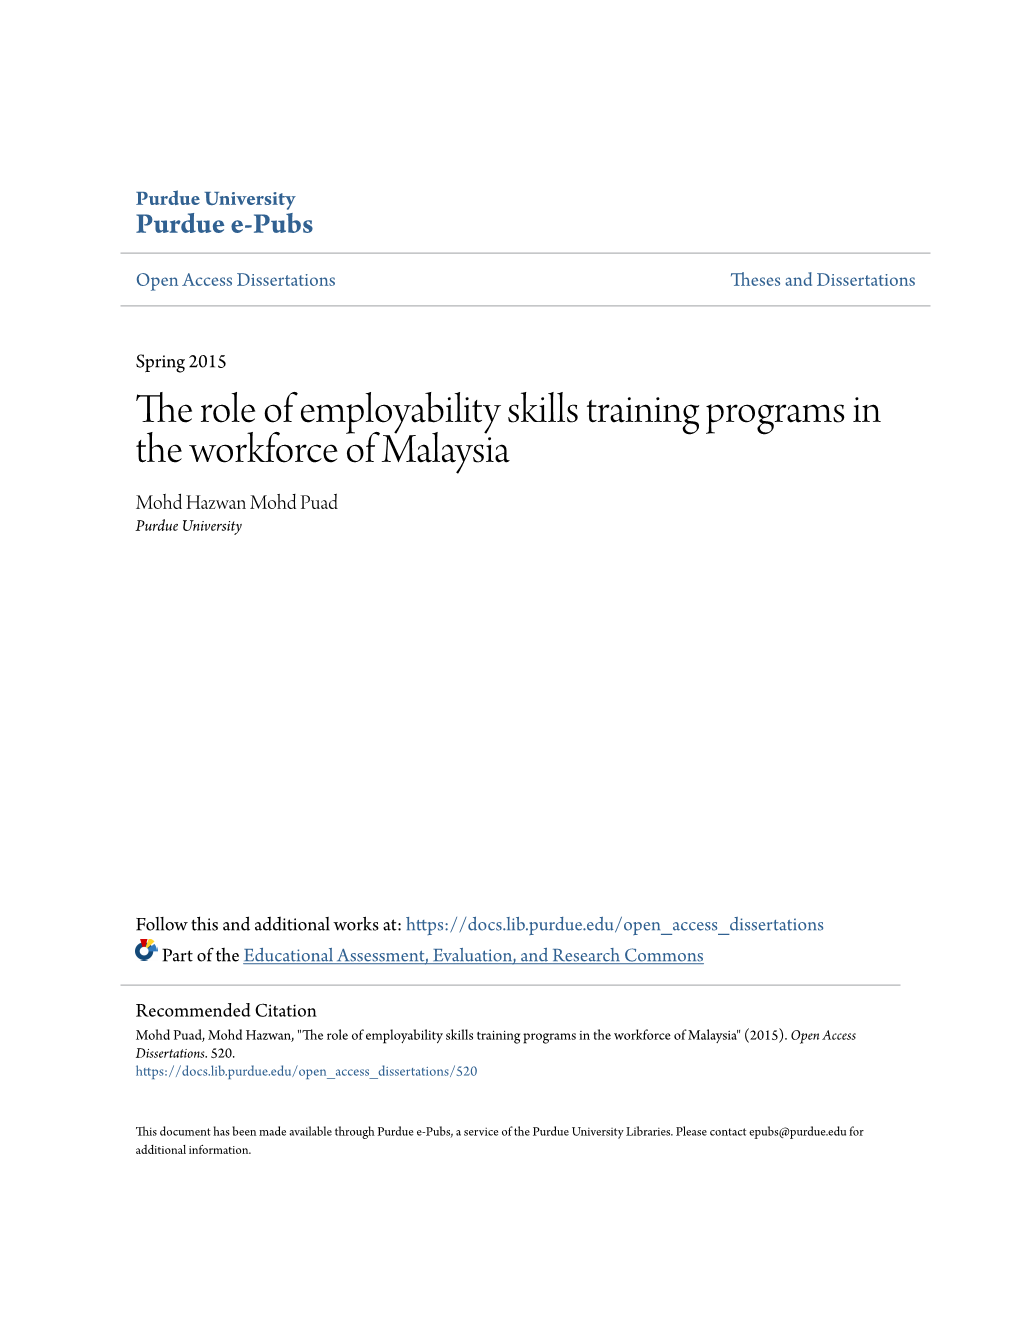 The Role of Employability Skills Training Programs in the Workforce of Malaysia